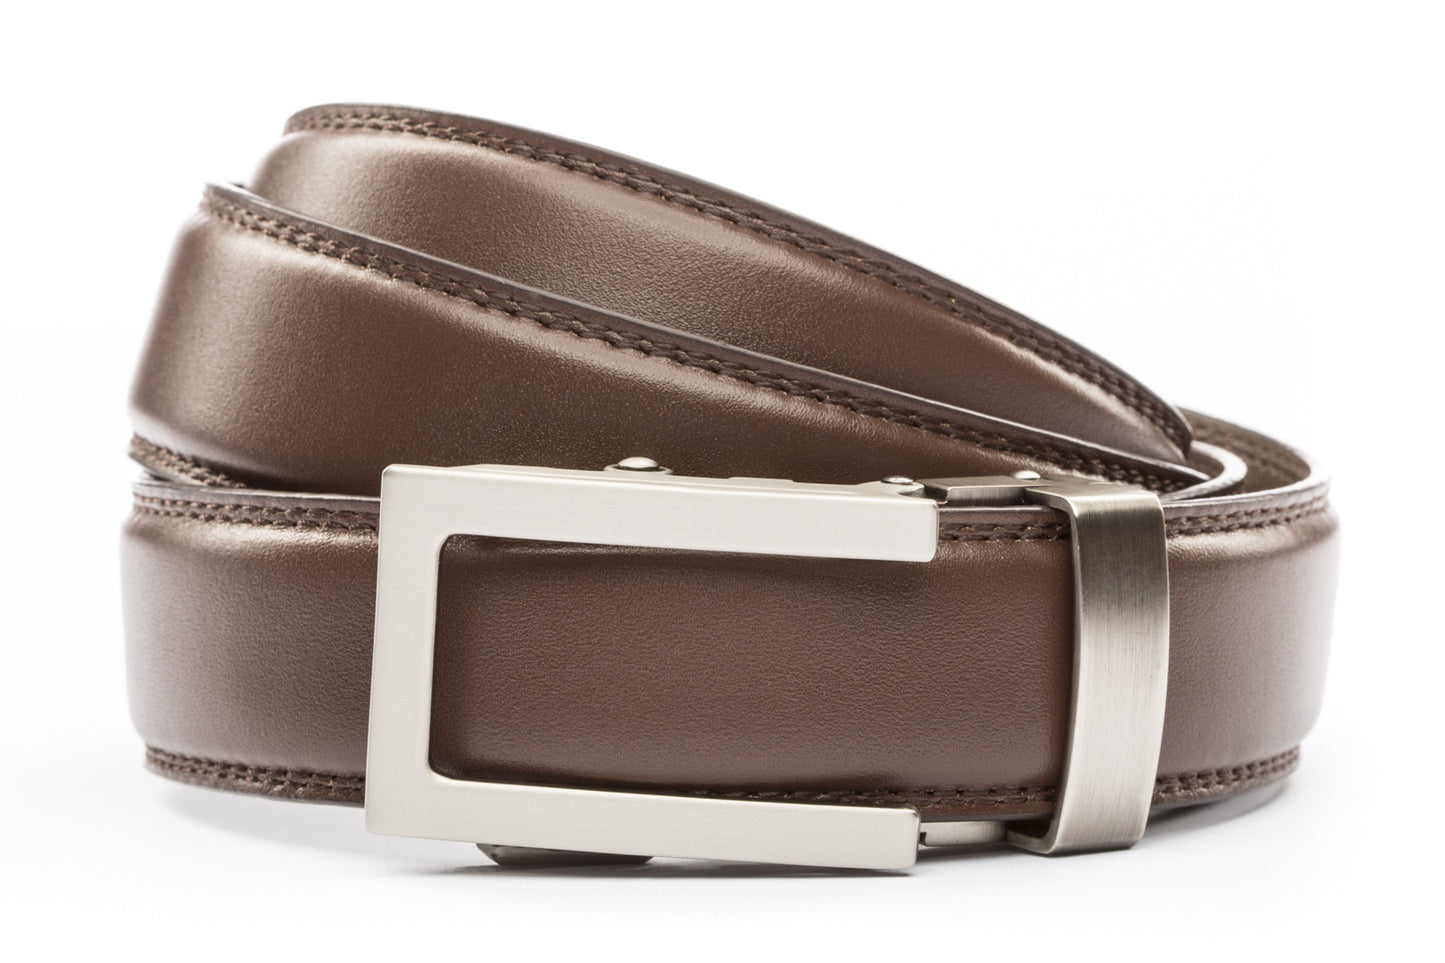 Micro Adjustable Belt With NO HOLES! Anson Belt Review 